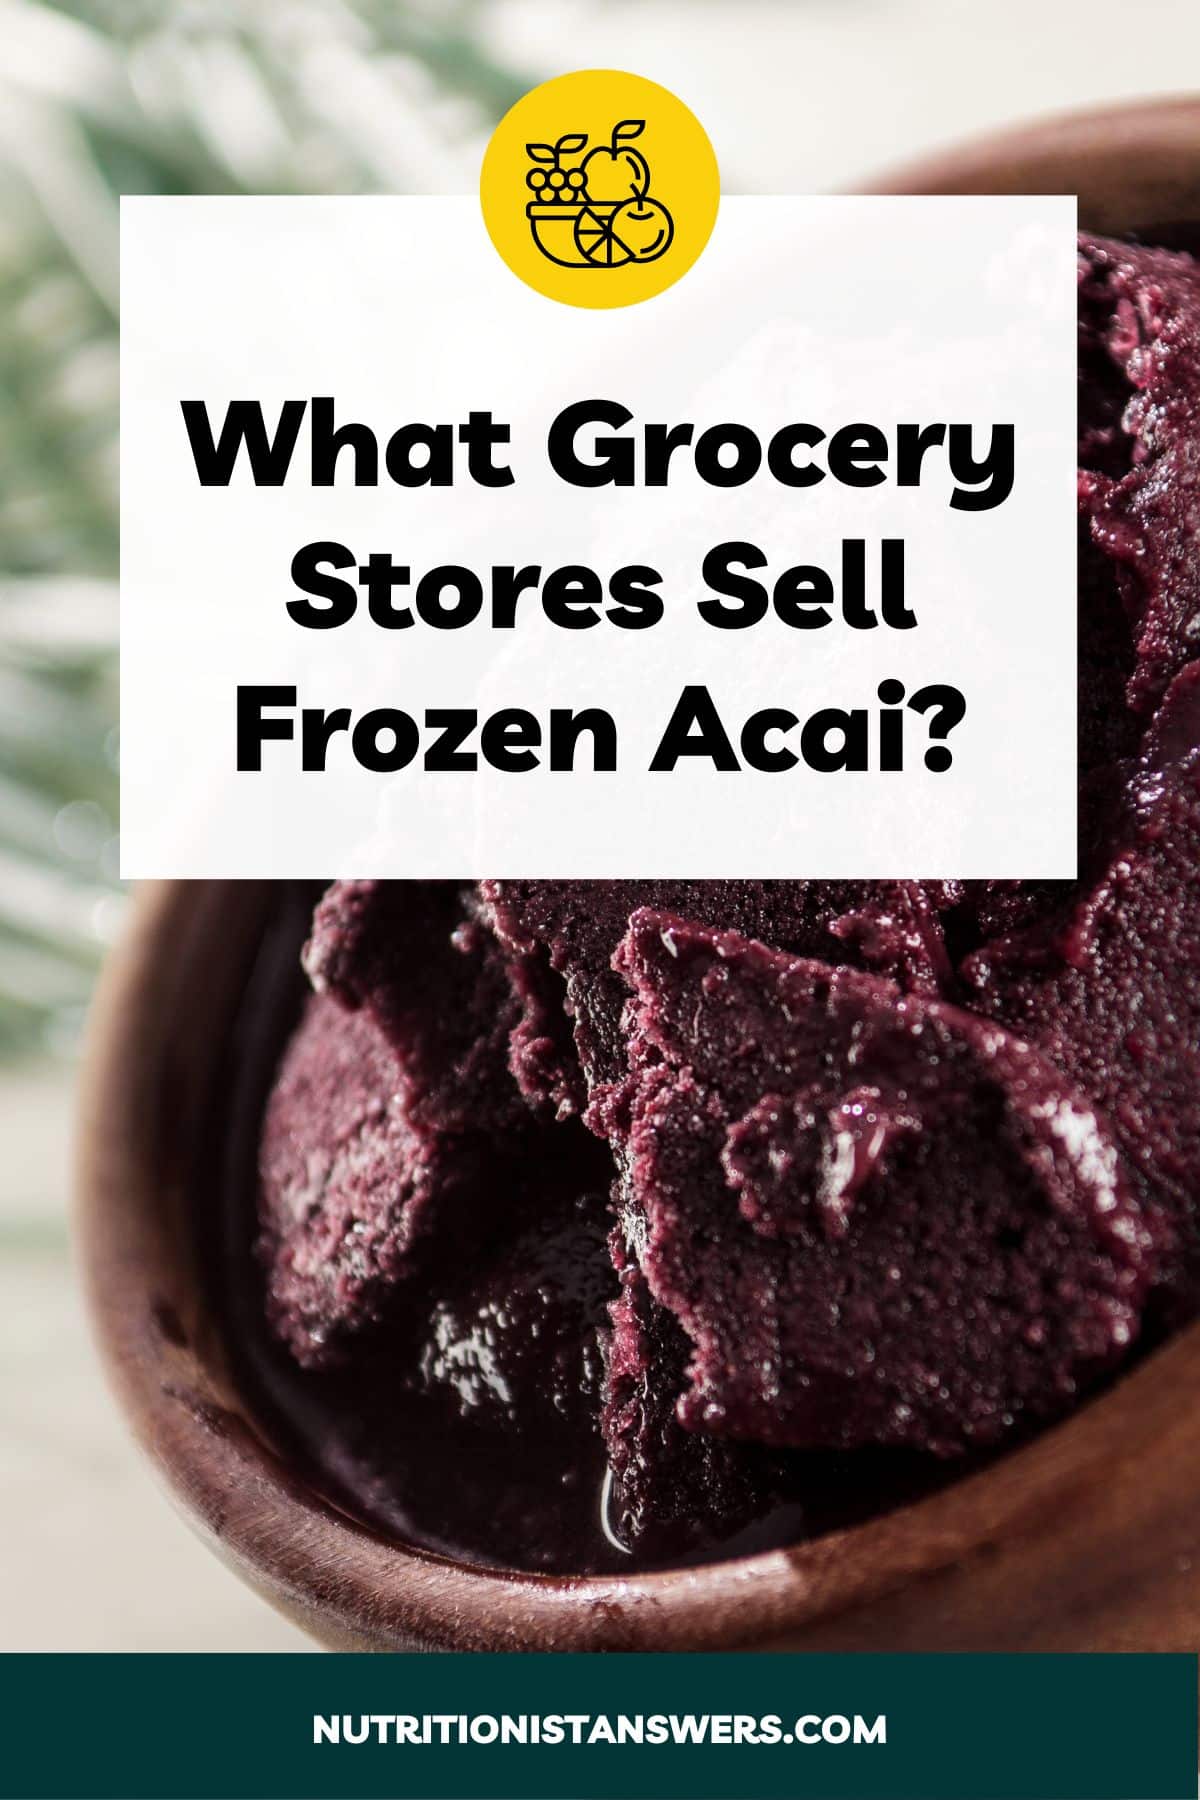 What Grocery Stores Sell Frozen Acai?